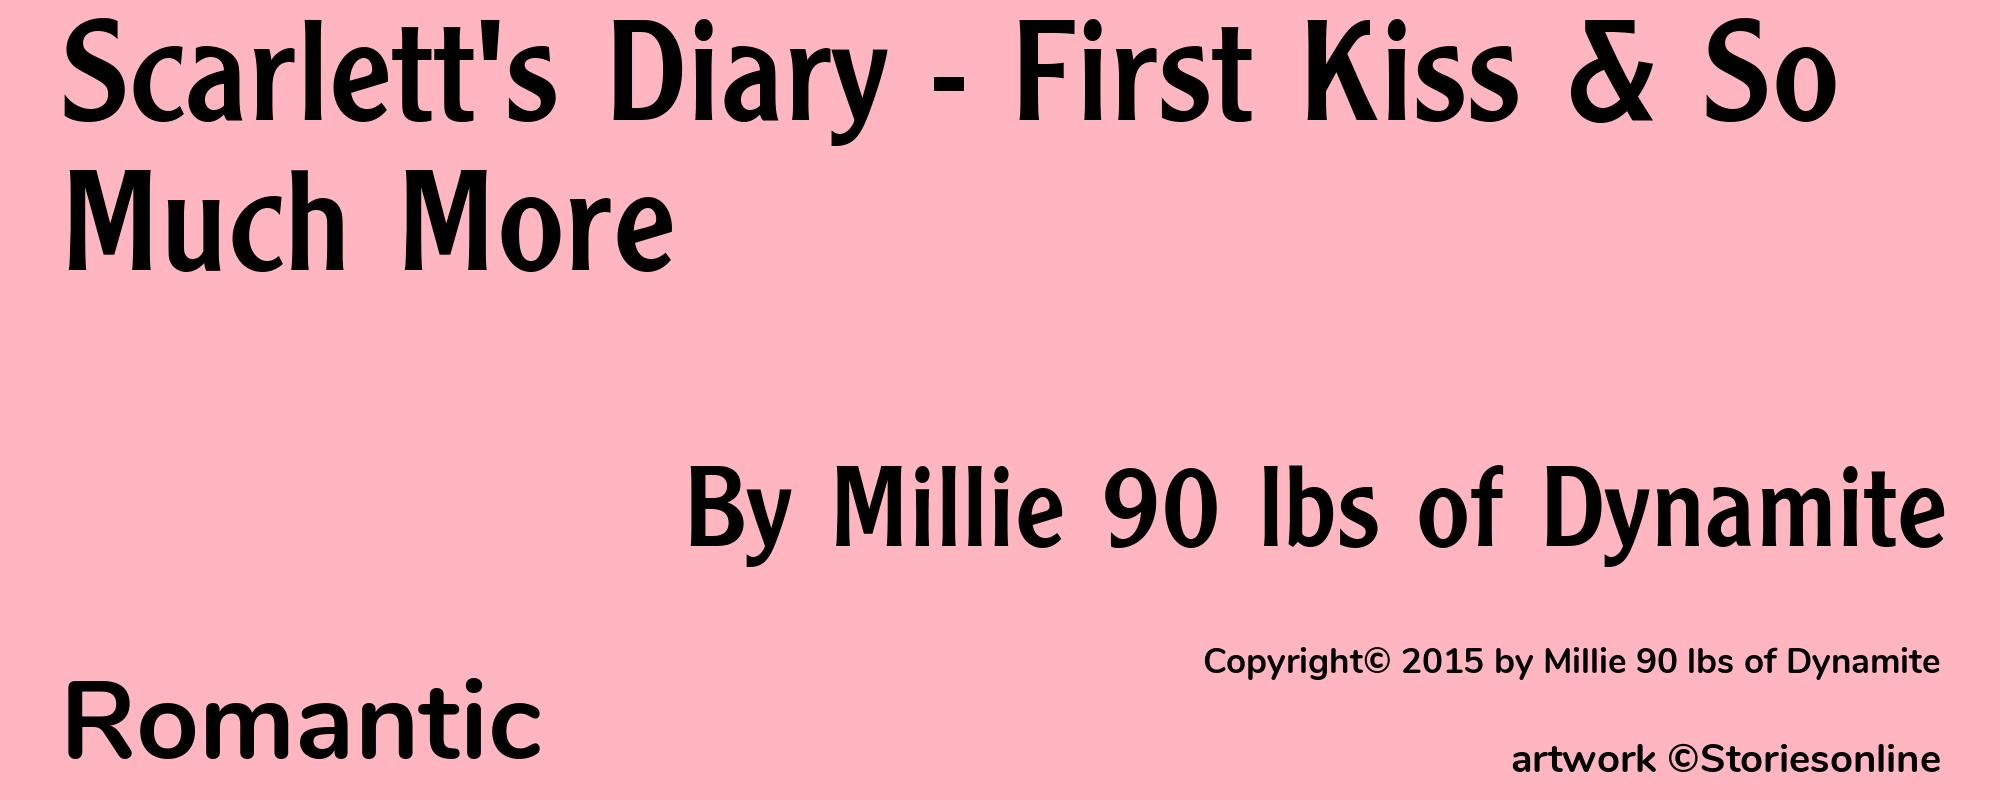 Scarlett's Diary - First Kiss & So Much More - Cover